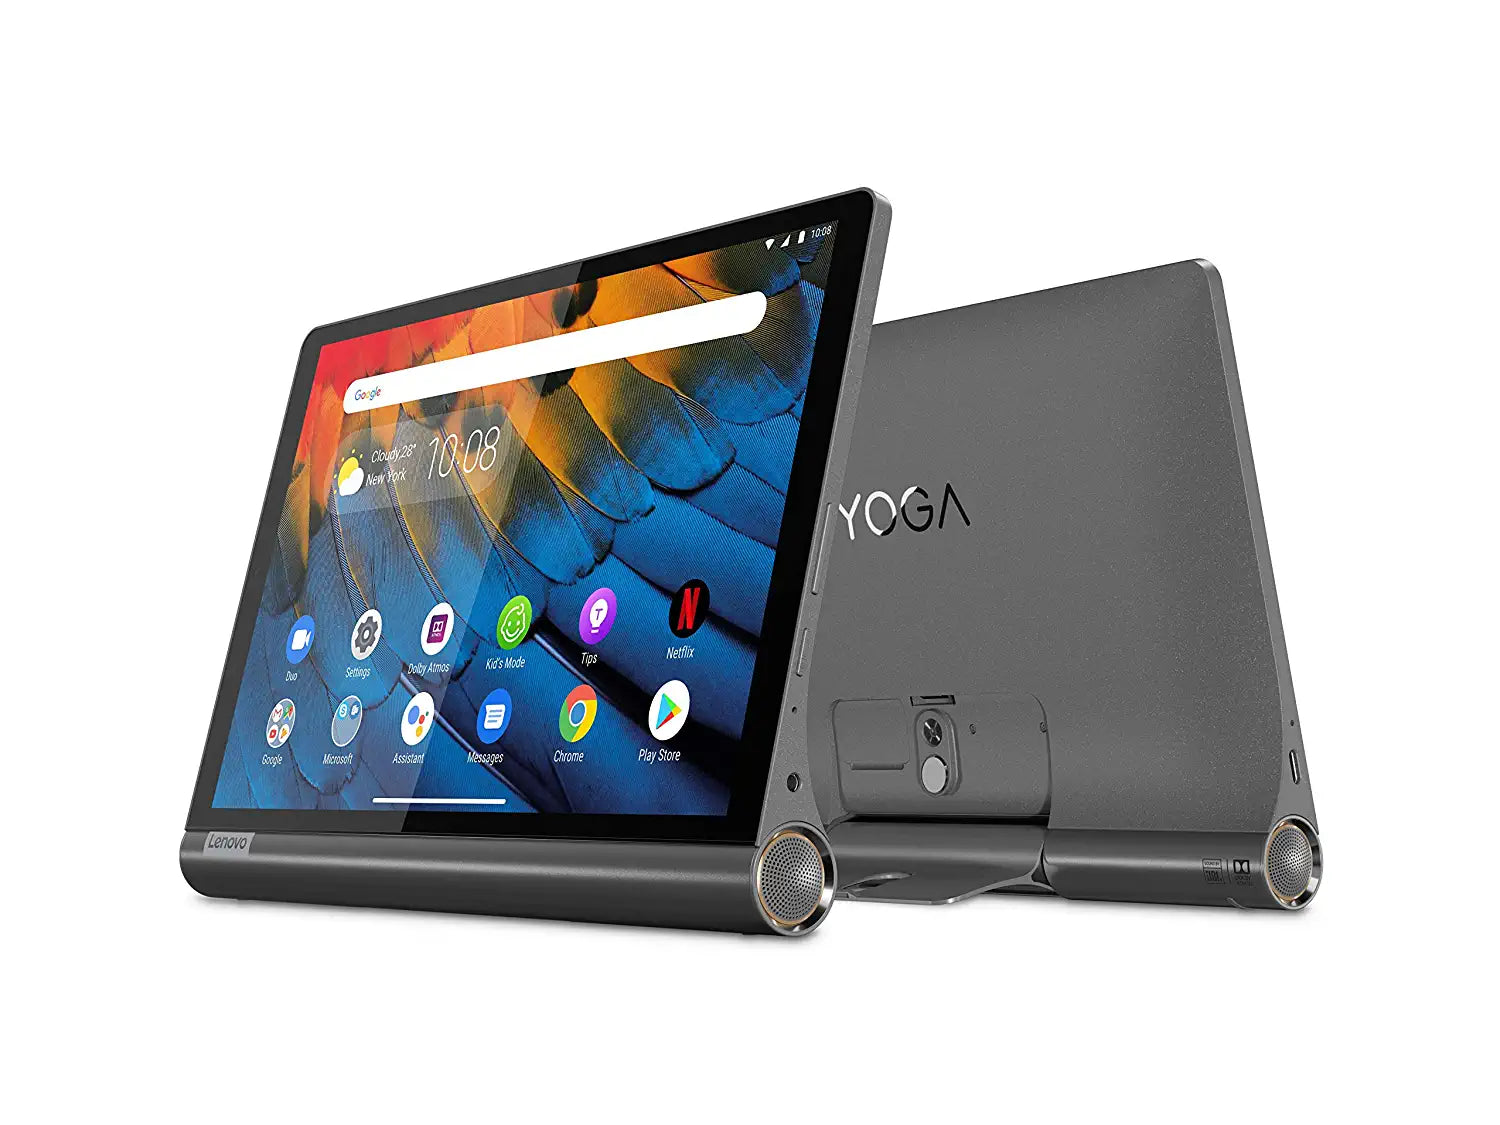 Lenovo Tab Yoga Smart Tablet with The Google Assistant (10.1 inch/25.65 cm,  4GB, 64GB, Wi-Fi + 4G LTE, Calling), Iron Grey